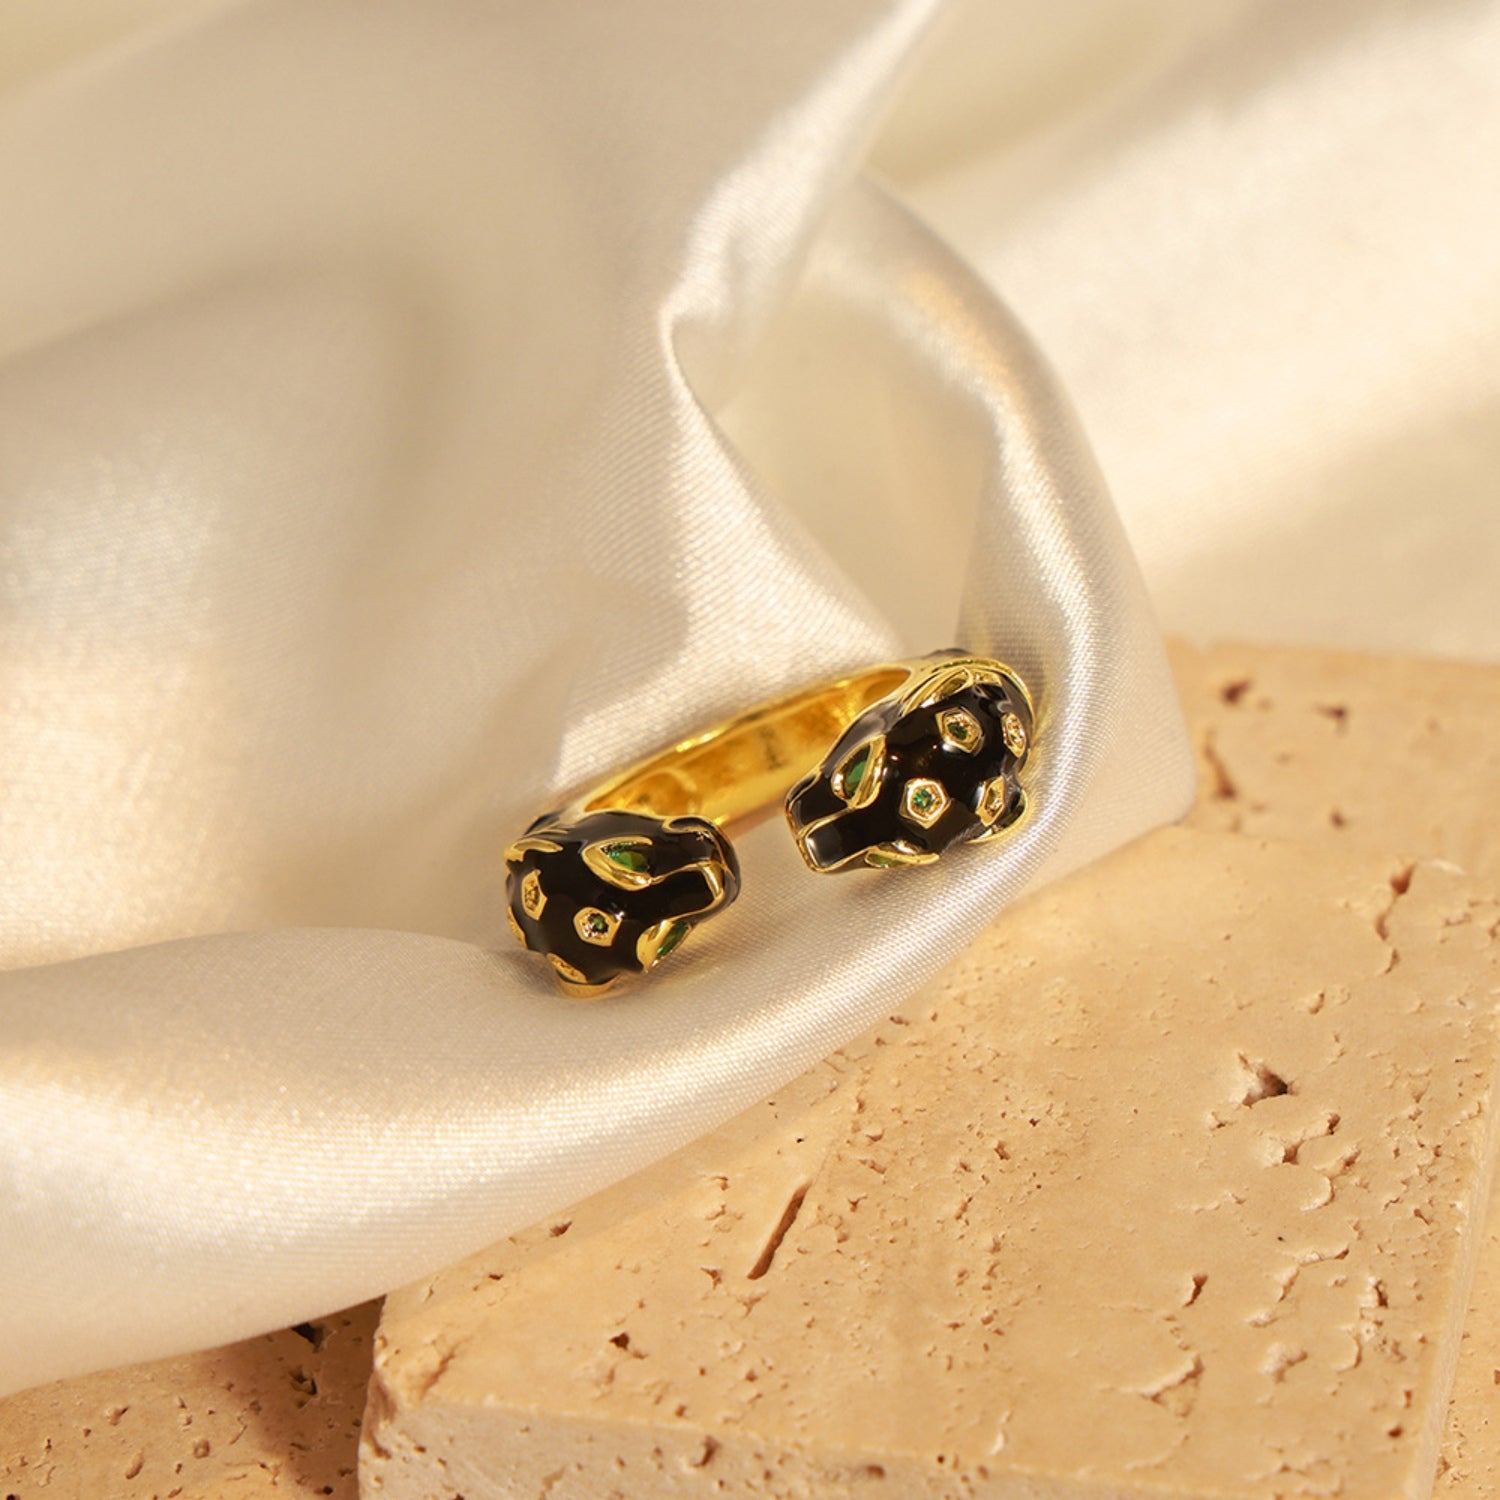 A close-up of a hand with a golden zircon ring shaped like a stylized panther head, featuring black detailing and small gemstone accents that add a touch of luxury and boldness to the jewelry piece. The ring is worn on the middle finger, complementing an elegant and sophisticated style.